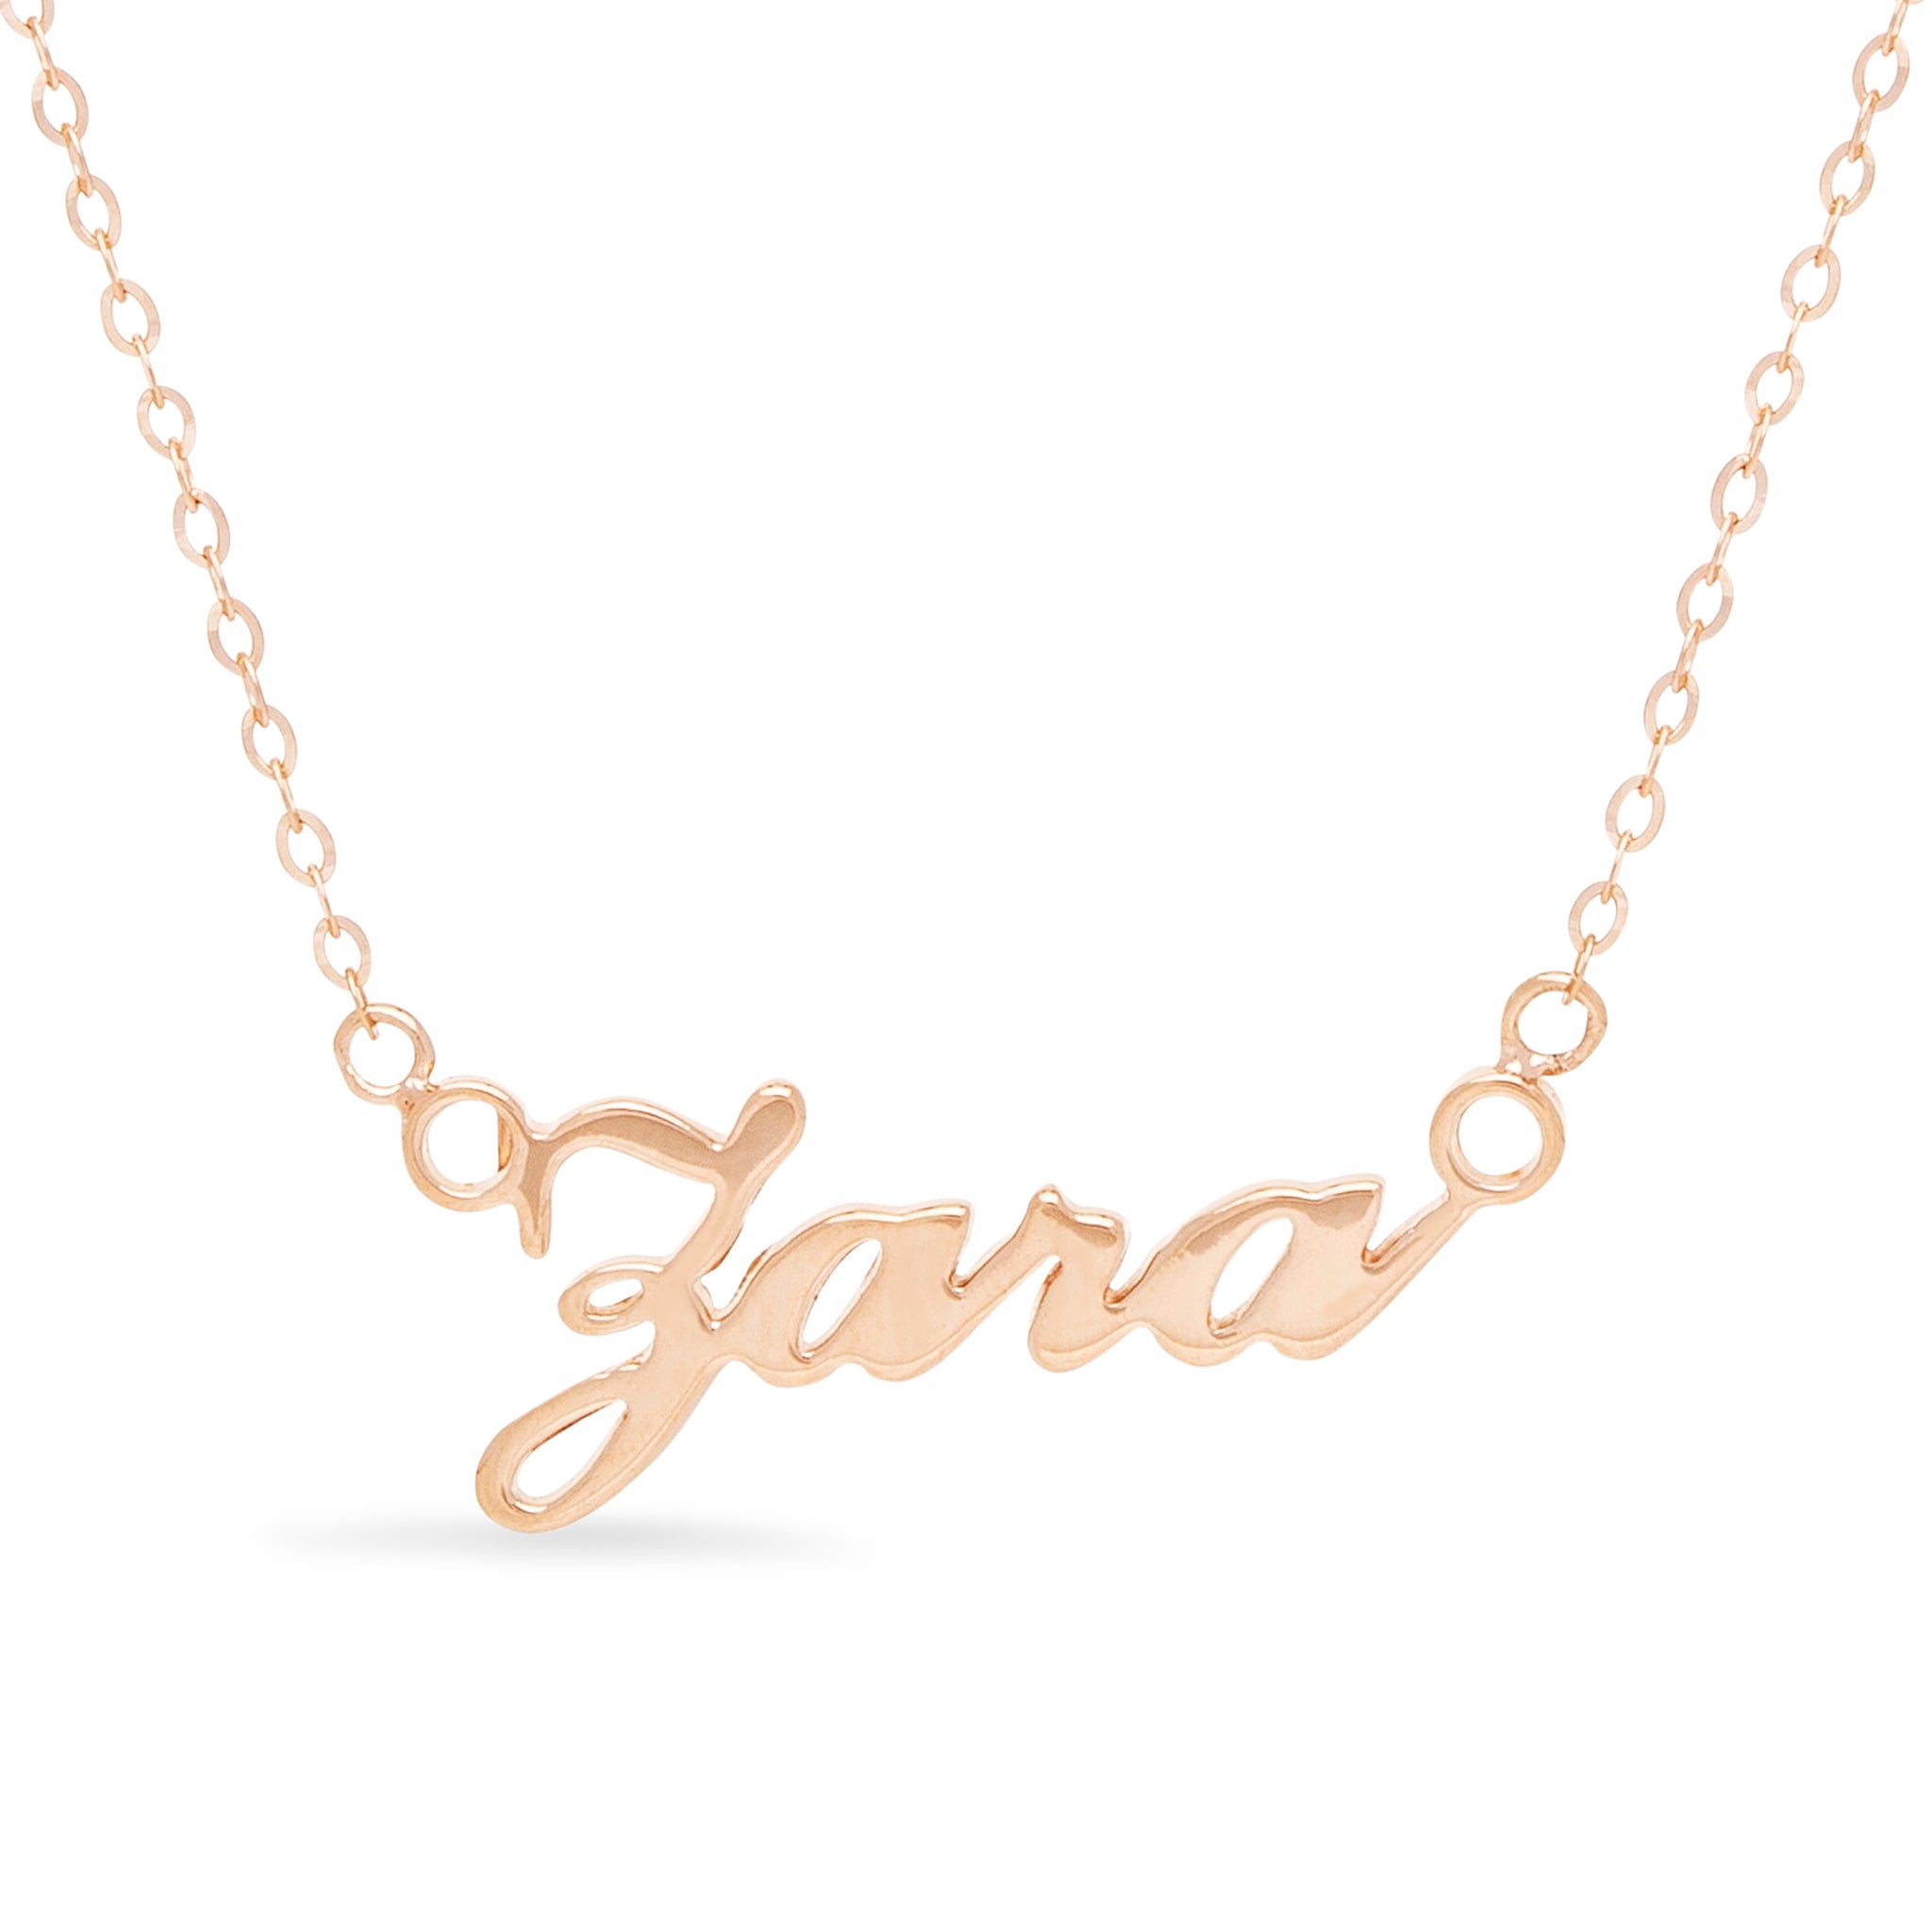 Solid Rose Gold Carrie Style Name Necklace